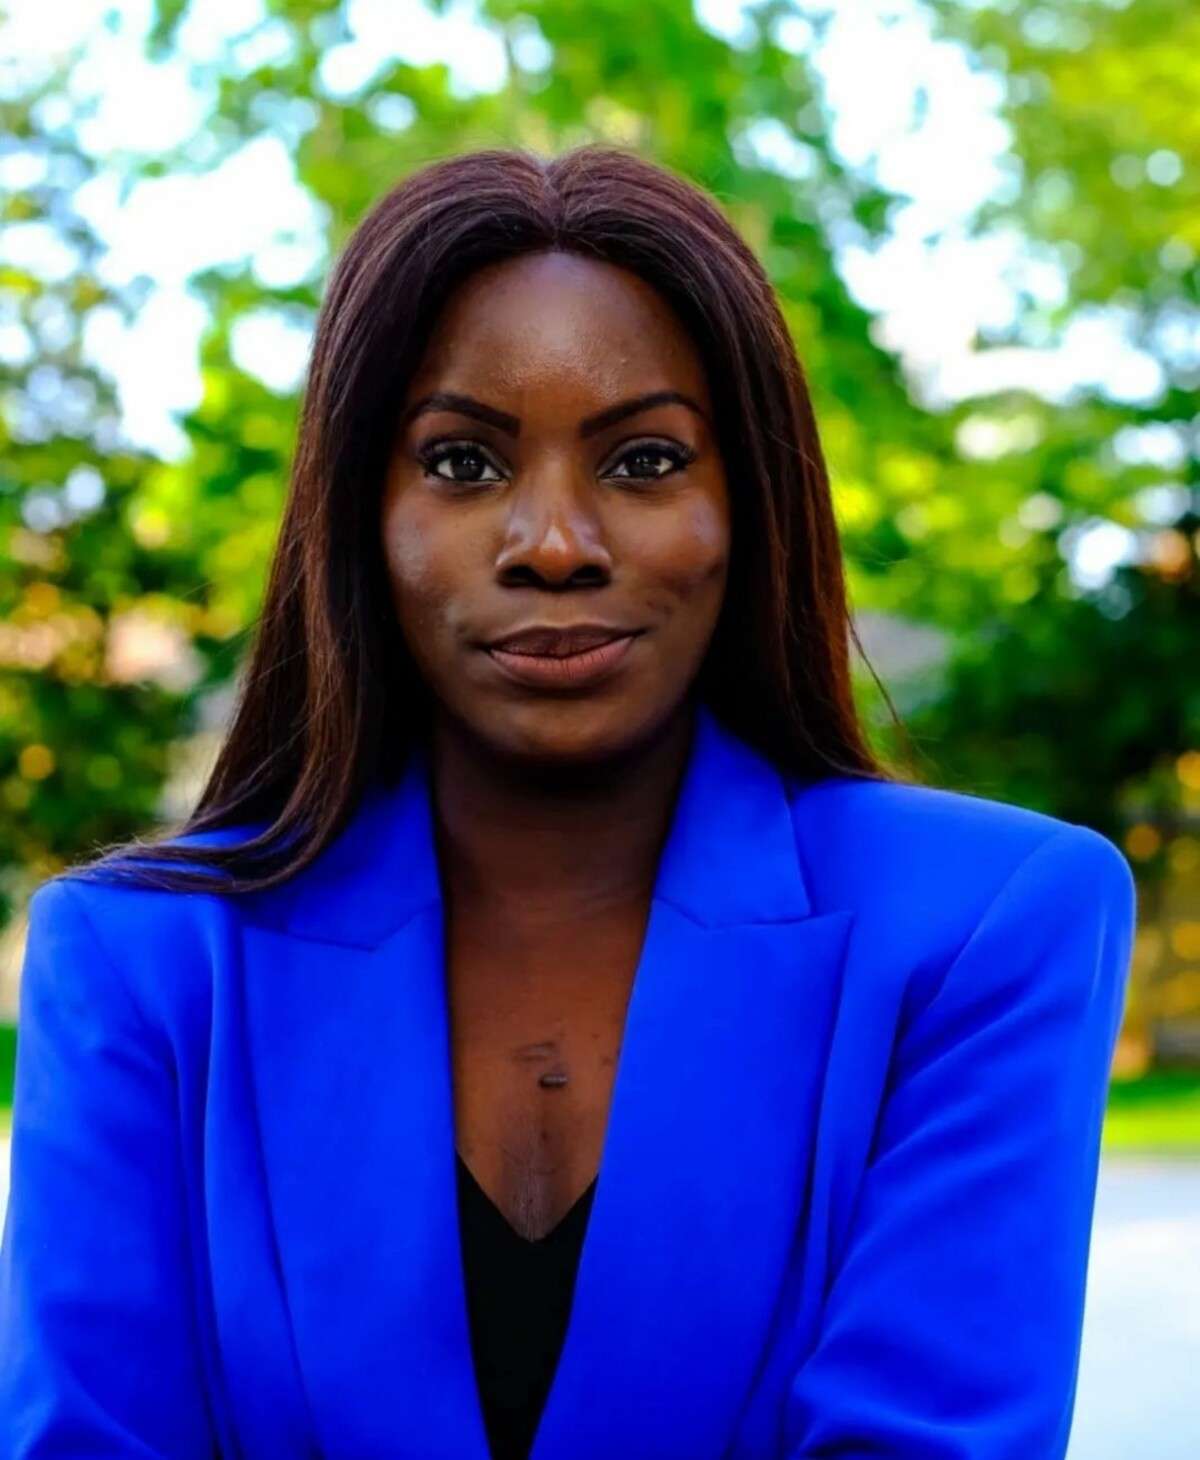 Meet the 28 years old Nigerian elected as a City Councilor in Parma, Italy